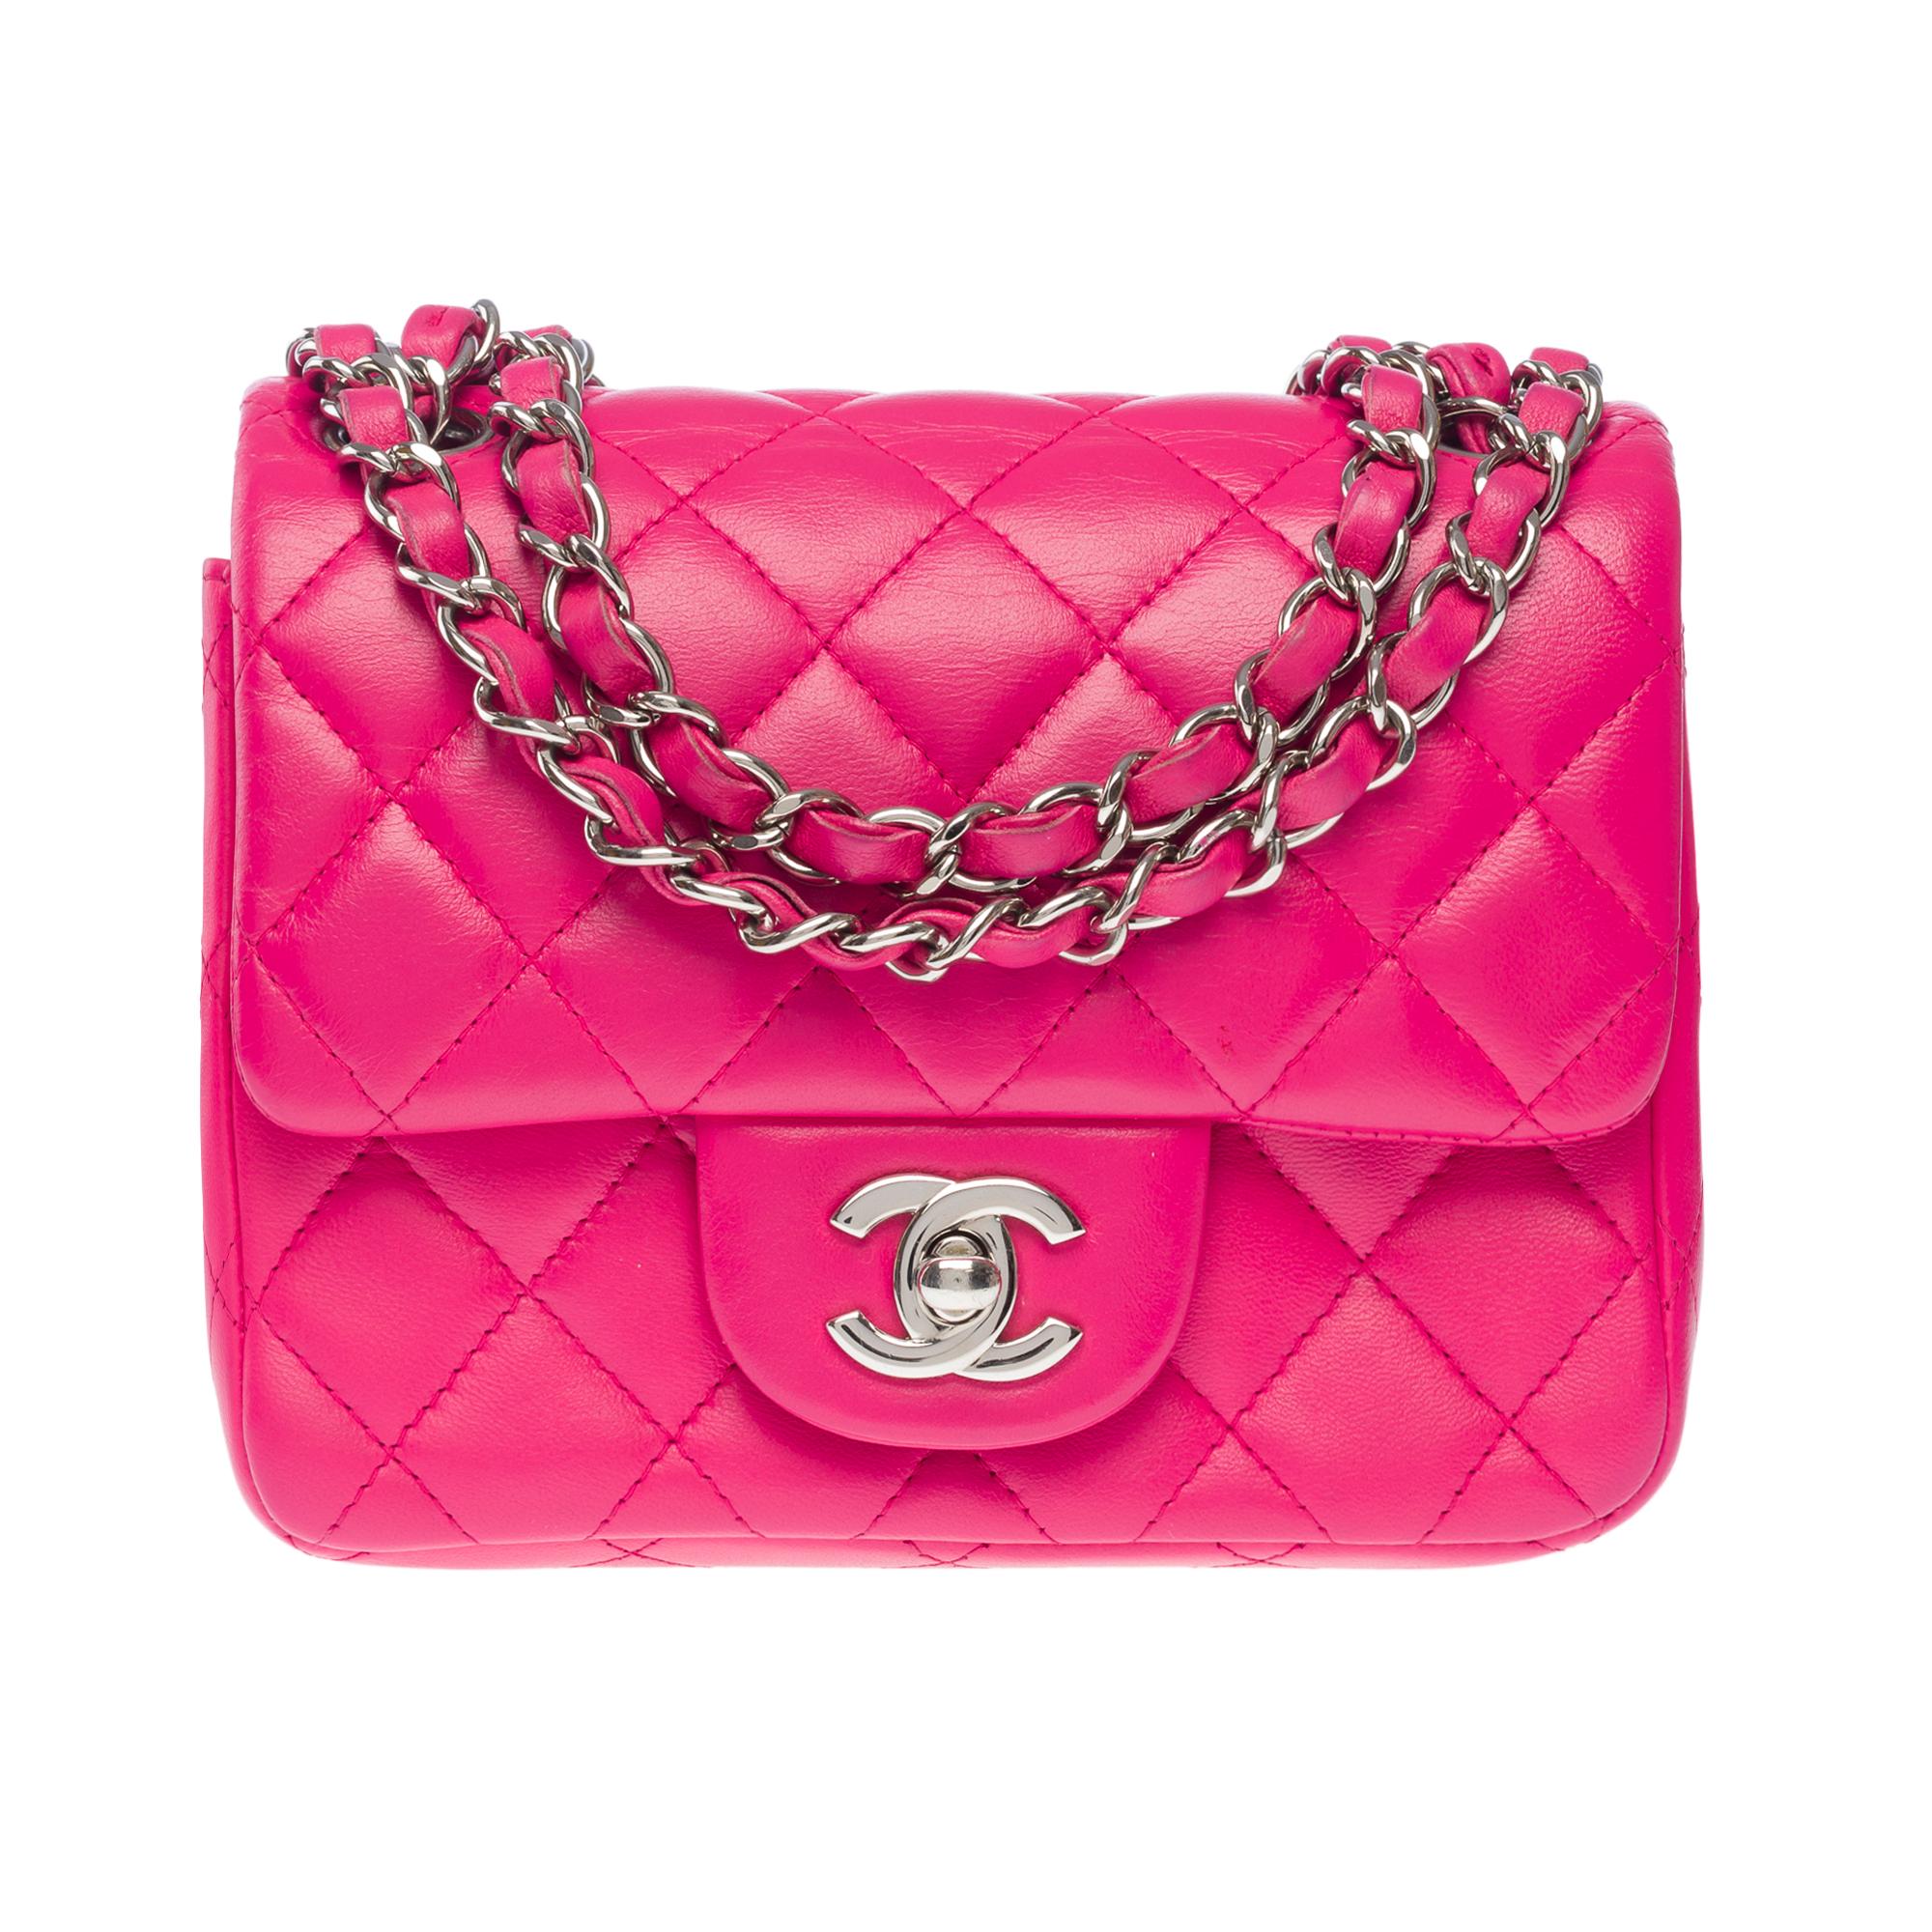 Exceptional​​ ​​Chanel​​ ​​Mini​​ ​​Timeless​​ ​​flap​​ ​​bag​​ ​​in​​ ​​pink​​ ​​quilted​​ ​​leather,​​ ​​silver​​ ​​metal​​ ​​chain​​ ​​handle​​ ​​intertwined​​ ​​with​​ ​​pink​​ ​​leather​​ ​​for​​ ​​shoulder​​ ​​or​​ ​​crossbody​​